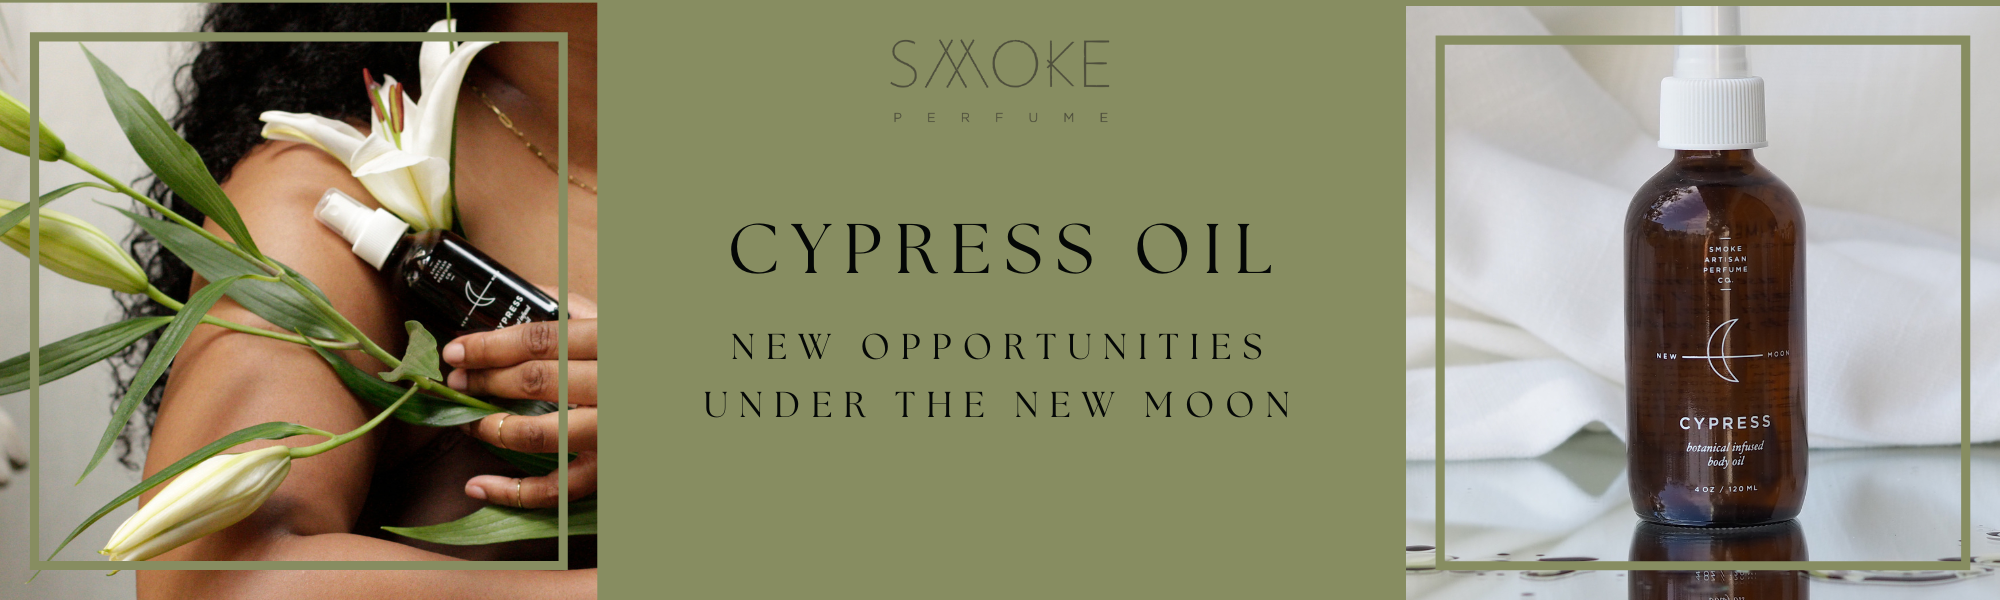 Cypress Oil: New Opportunities Under the New Moon